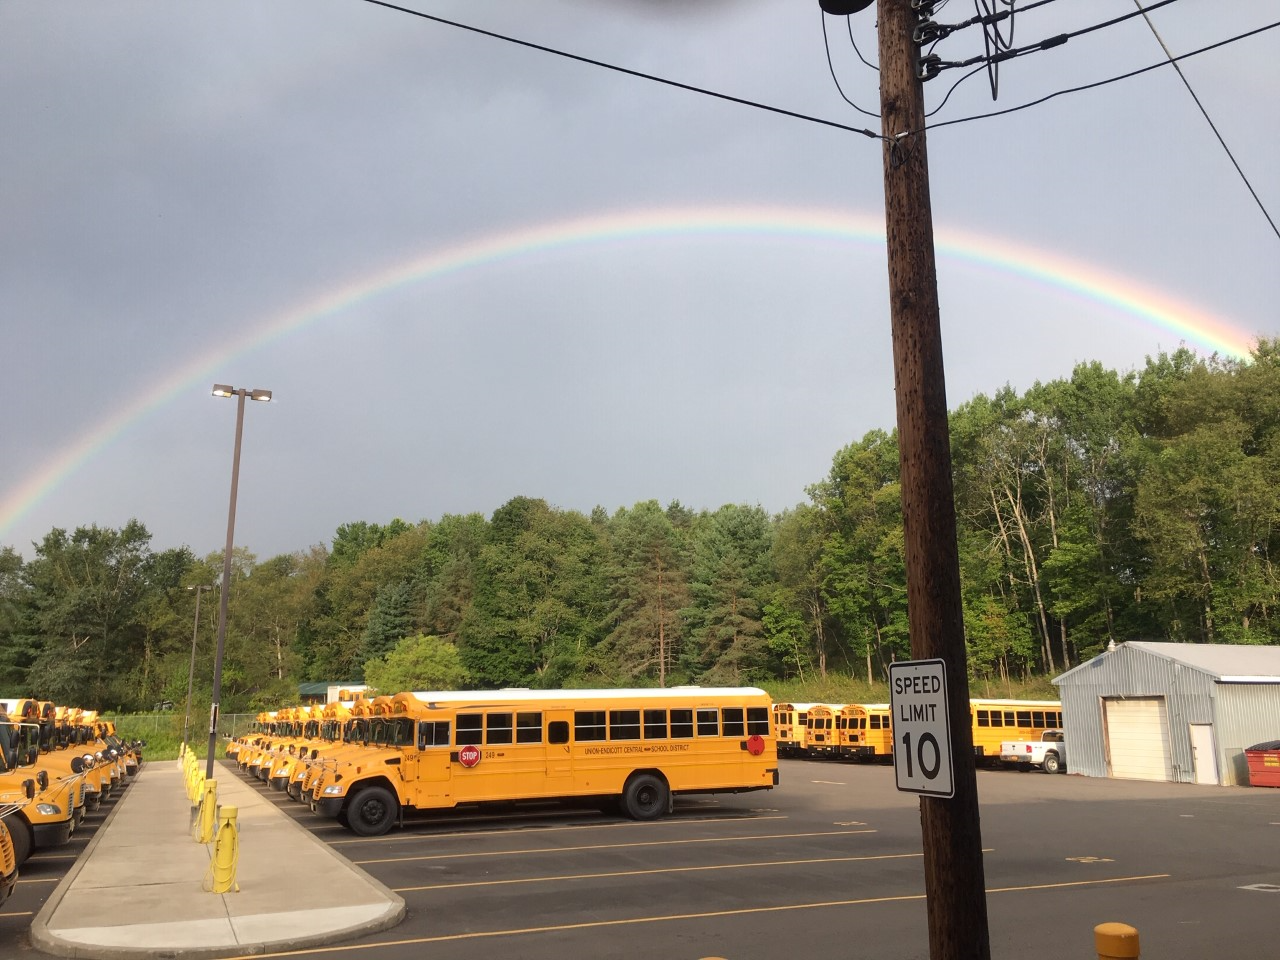 The bus yard with a rainbow in the sky